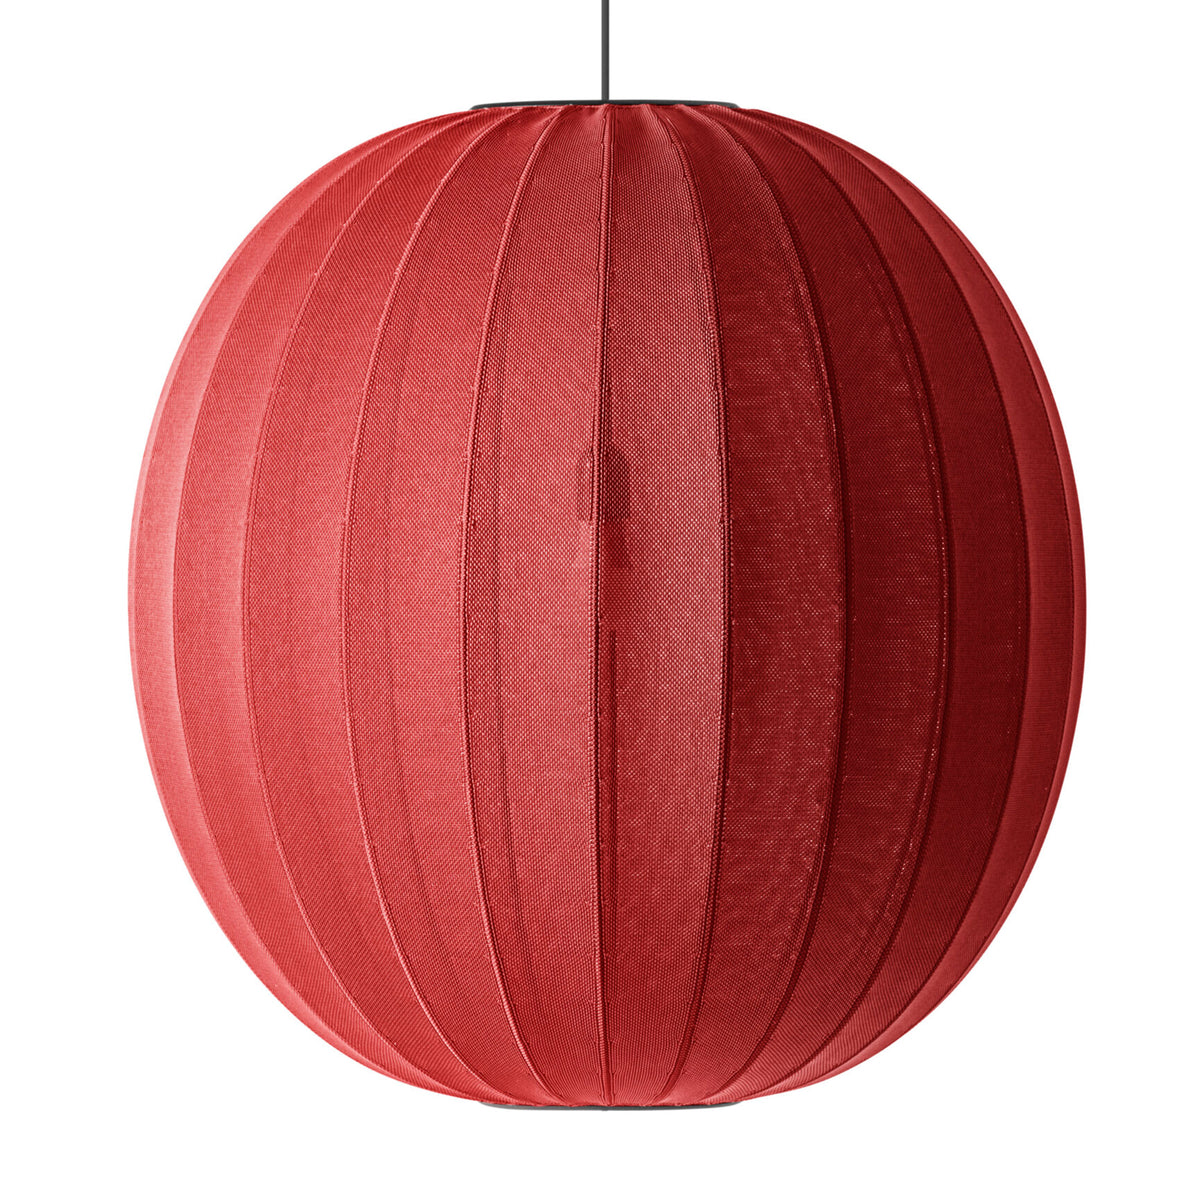 Made by Hand, Knit-Wit Pendant Lamp 75, Coral, Pendant,